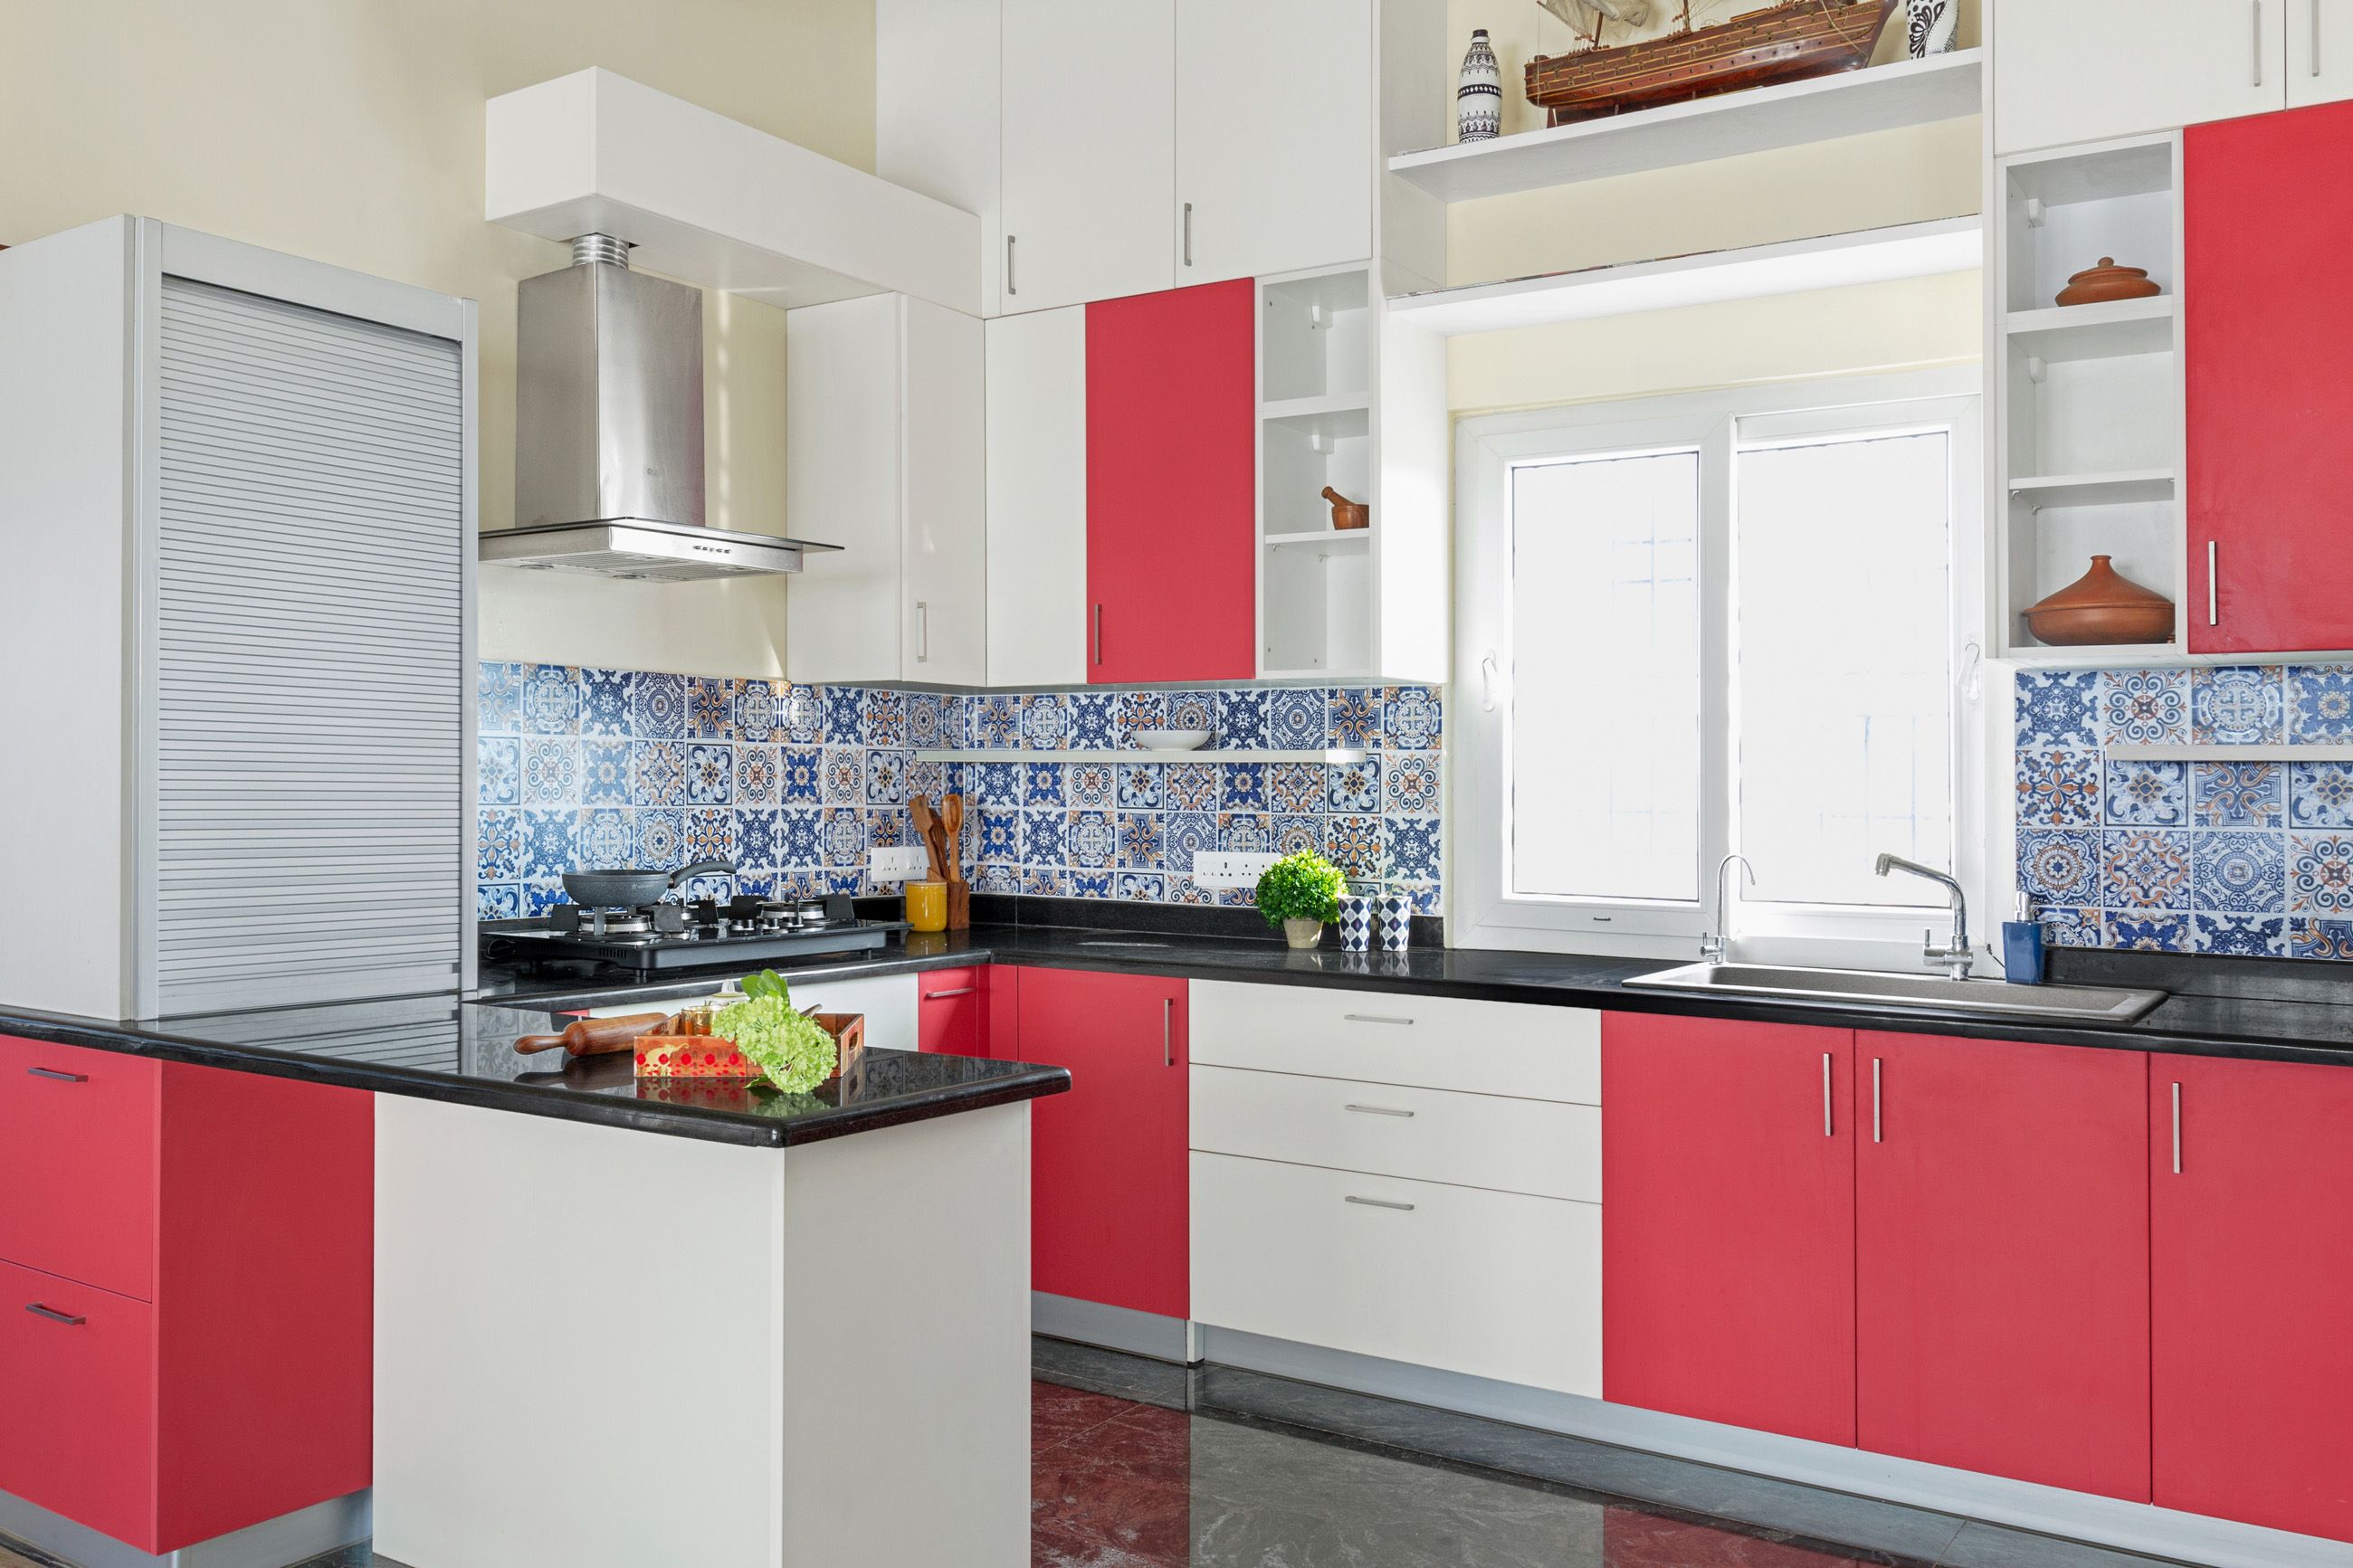 Modern U-Shaped Modular Kitchen Design with Poppy and Frosty White Cabinets